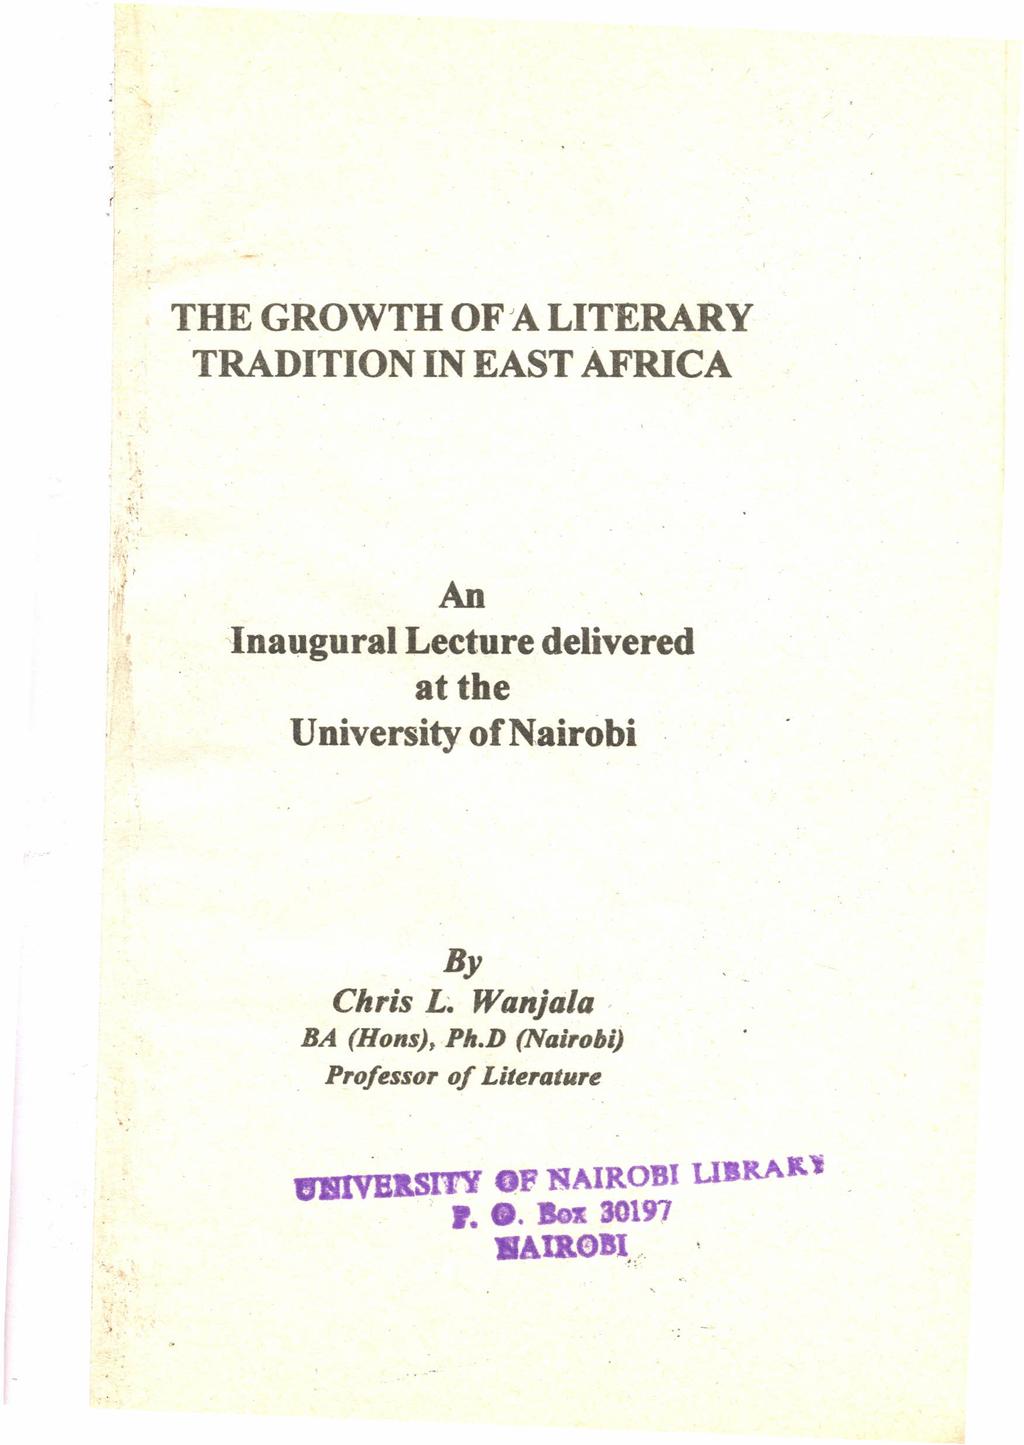 THE GROWTH OFJA LITERARY TRADITION IN EAST AFRICA An Inaugural Lecture delivered at the University of Nairobi By